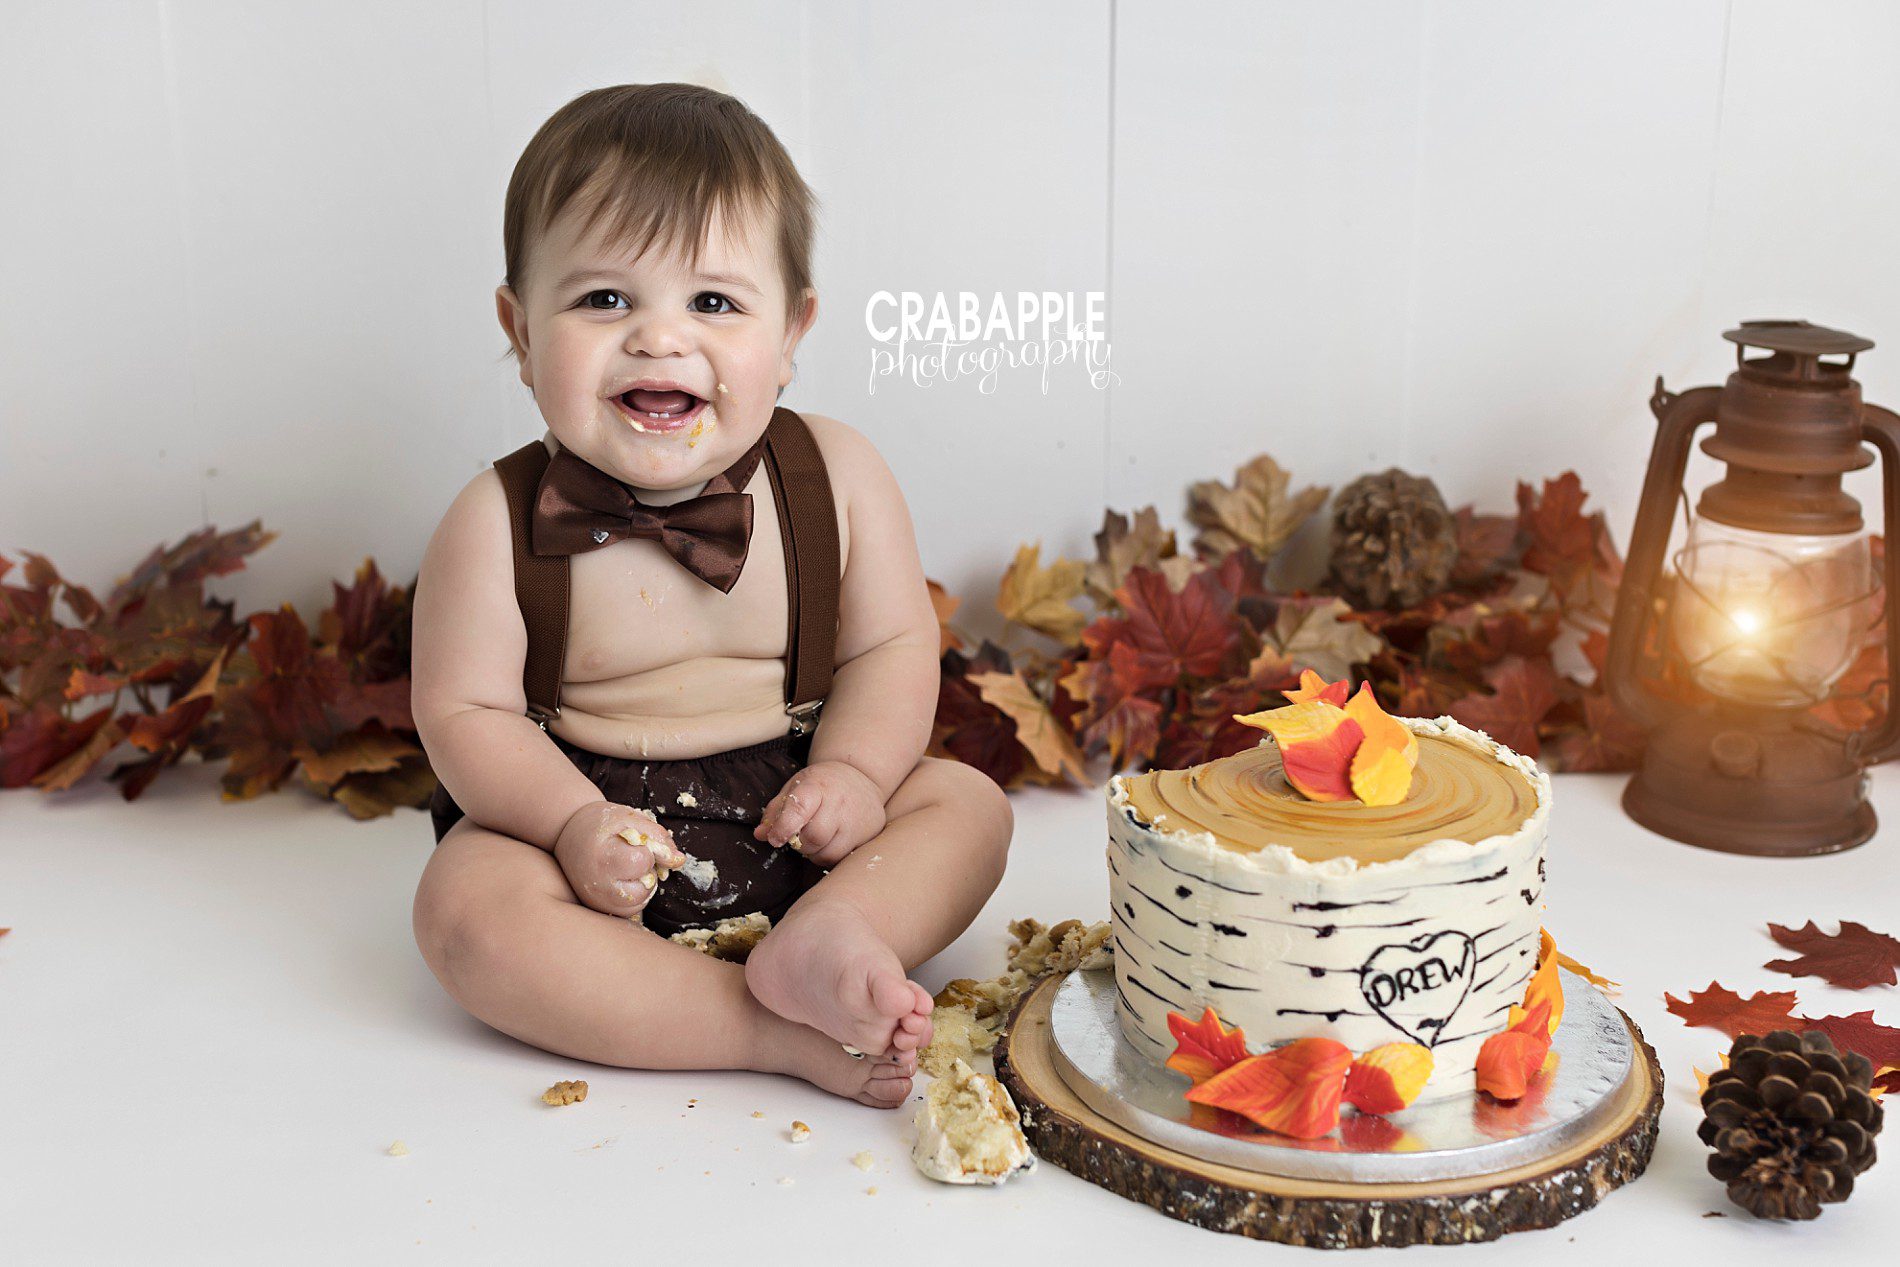 Autumn in New England themed first birthday cake smash photo session using brown and orange, leaves, pinecones, and a tree cake.